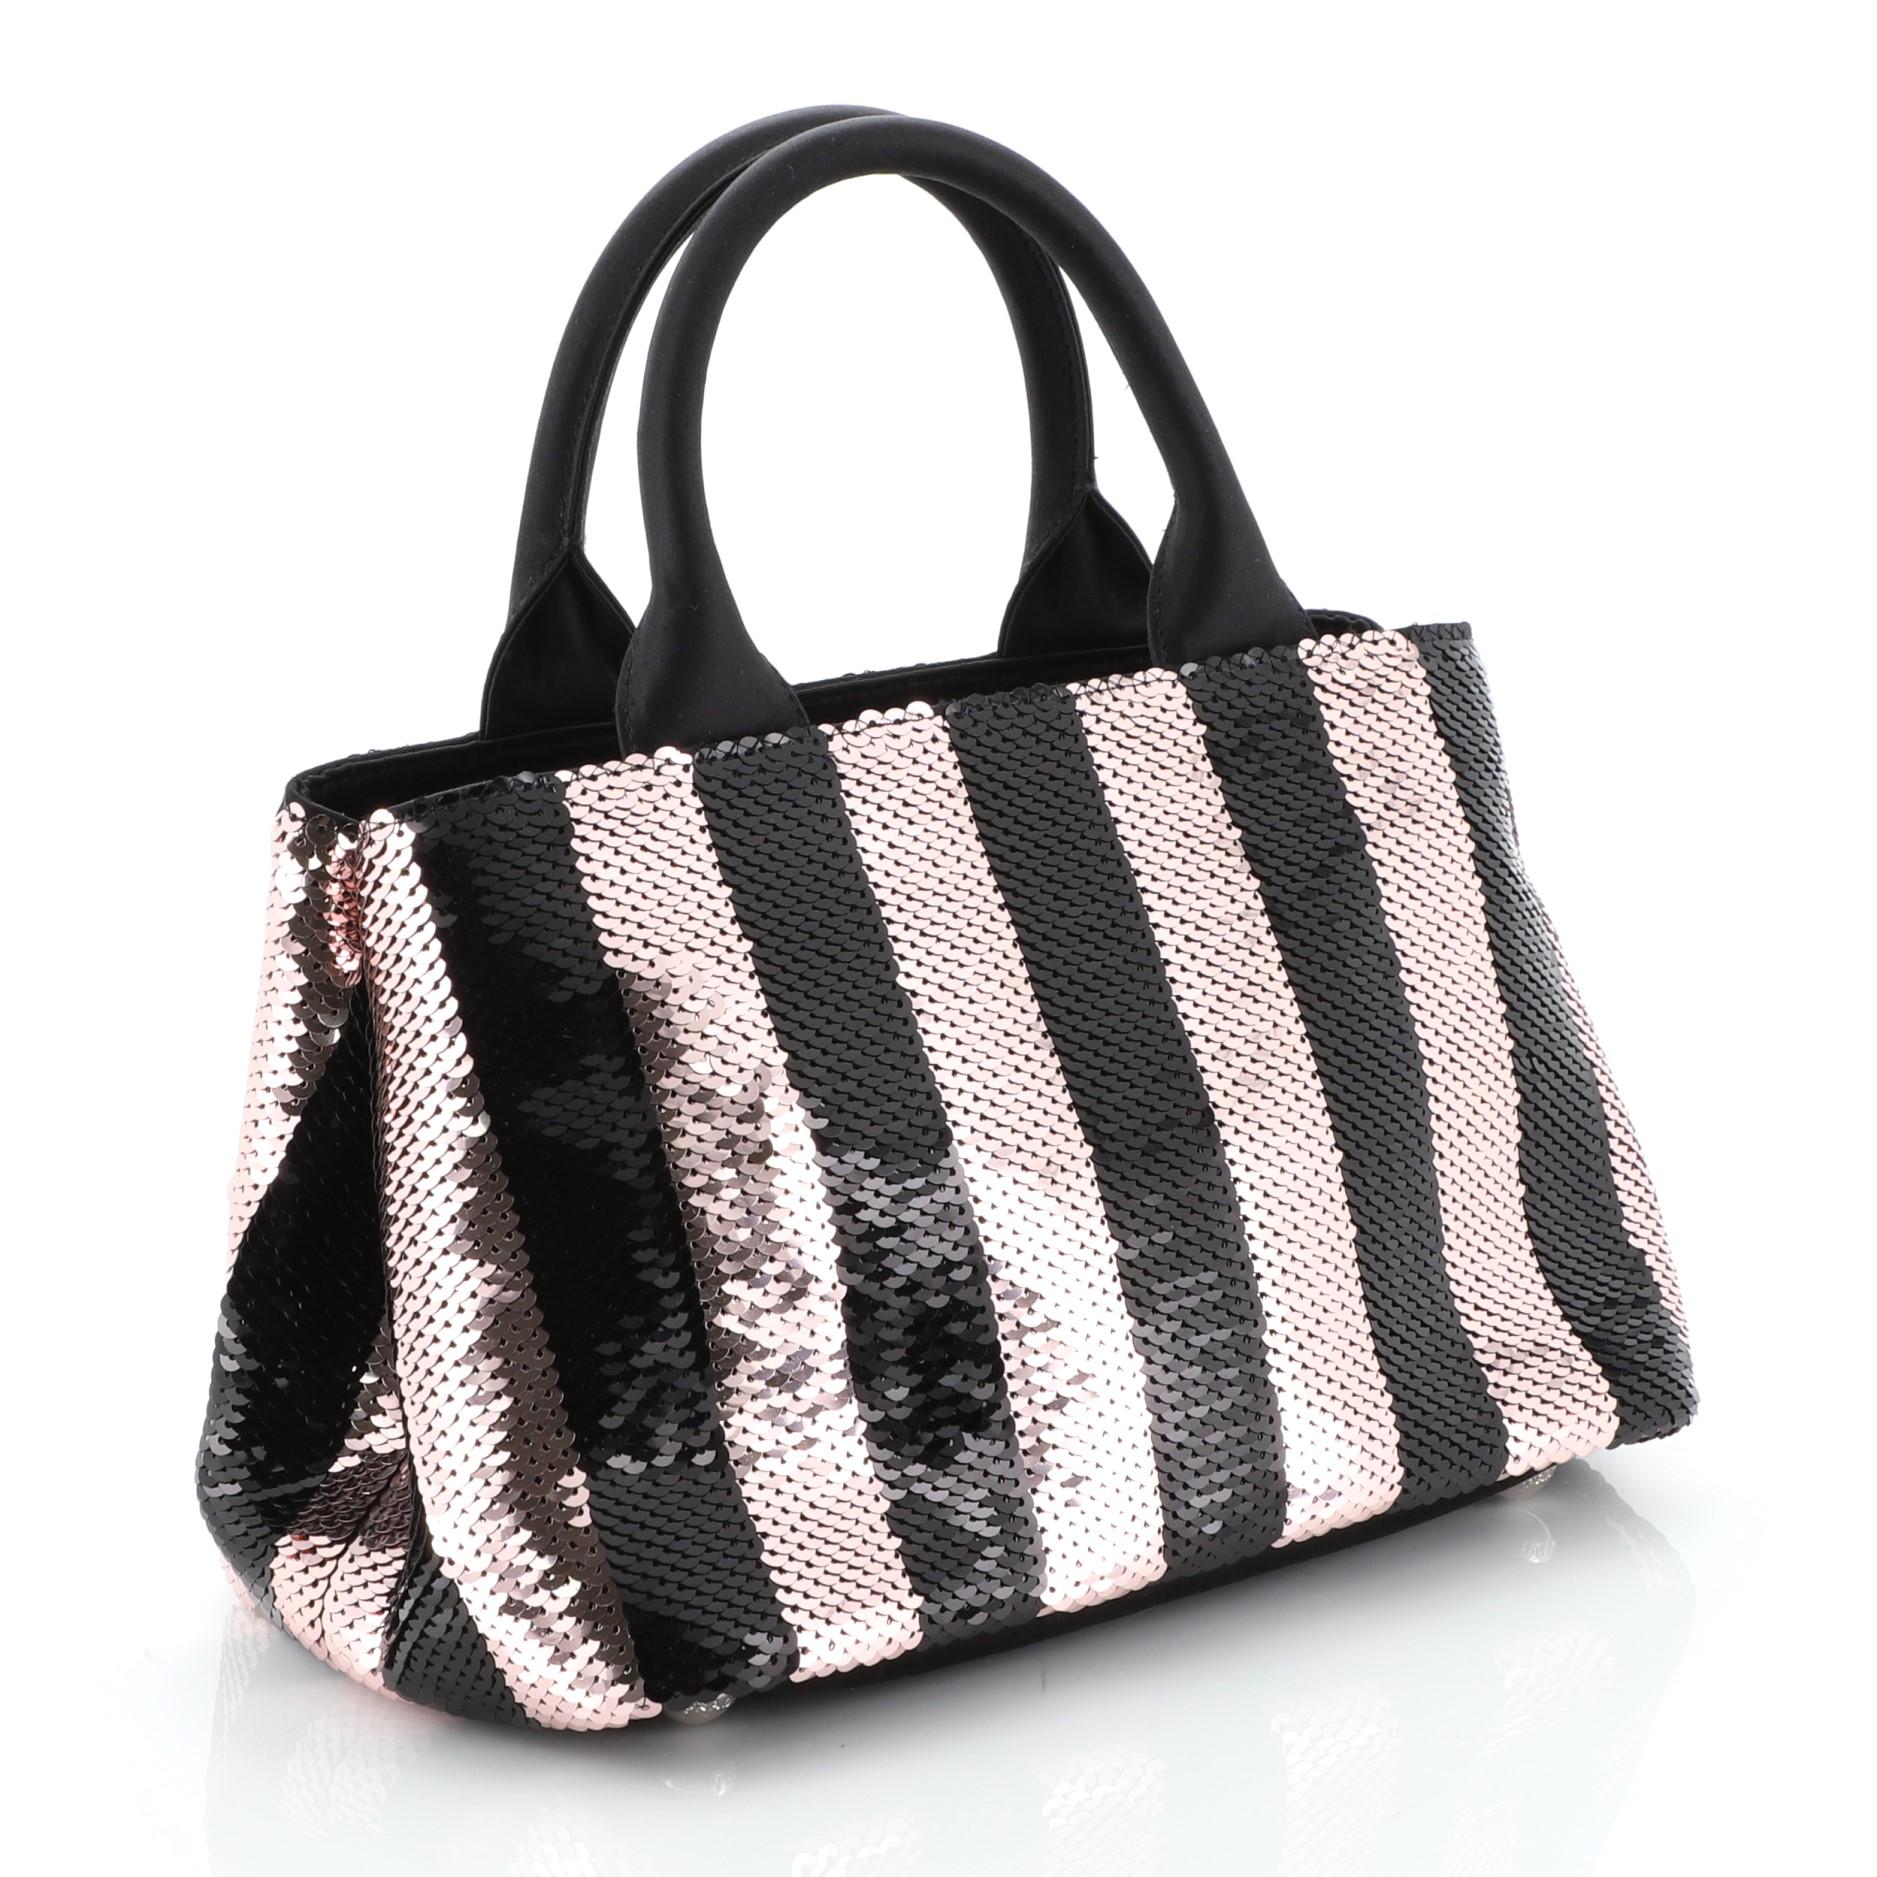 This Prada Convertible Tote Sequin Embellished Satin Small, crafted from black and pink sequin embellished satin, features dual rolled handles and silver-tone hardware. Its zip closure opens to a black satin interior with side zip and slip pockets.